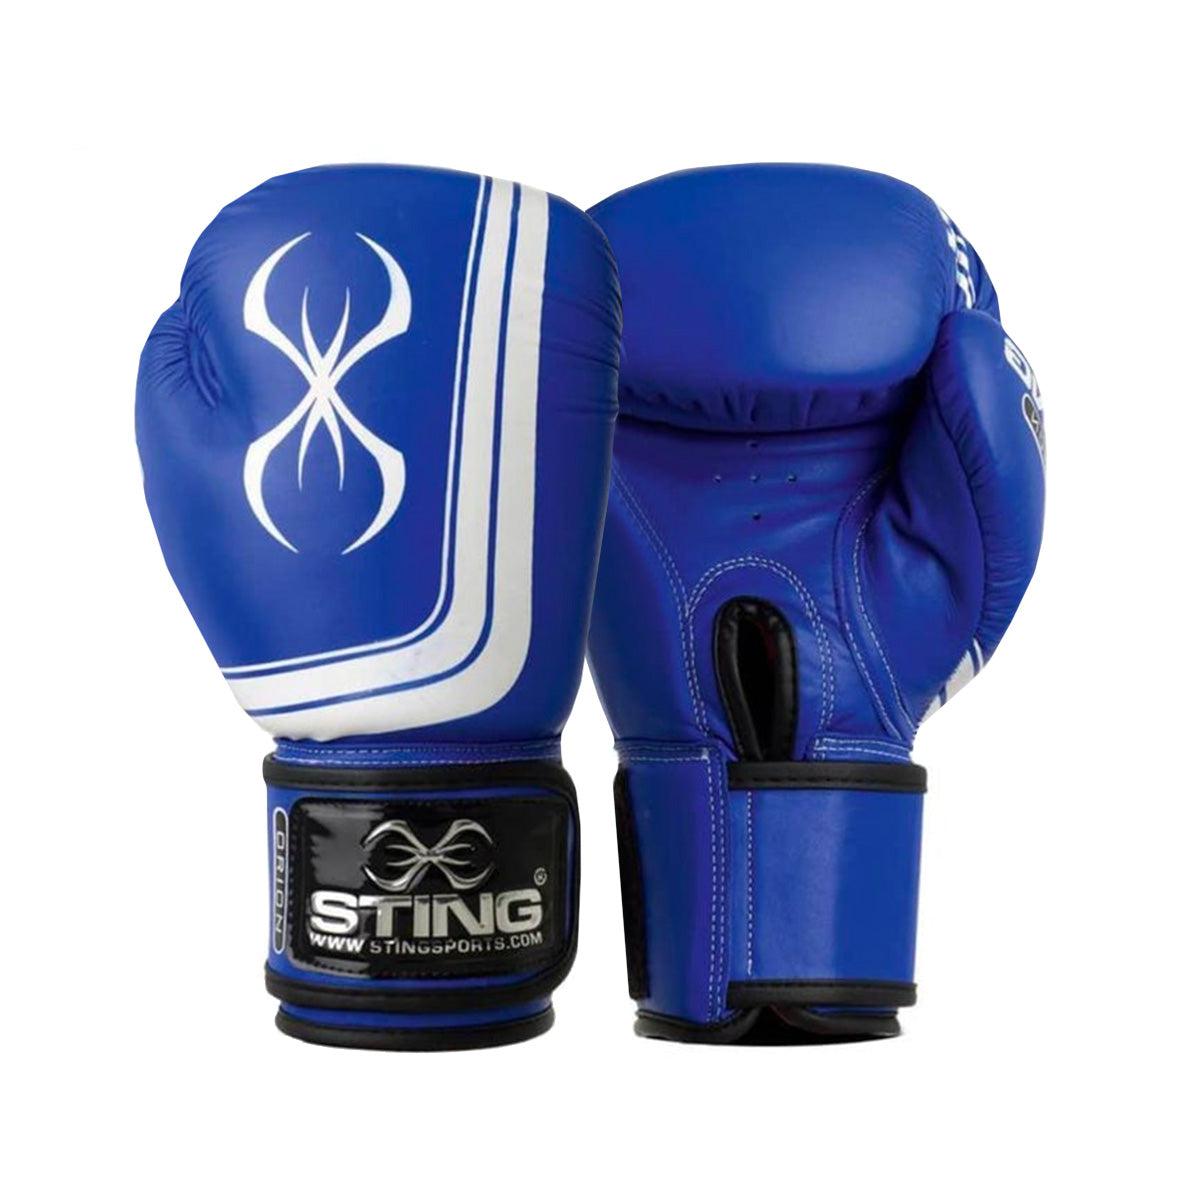 Sting Training Gloves Orion Boxing Gloves, Sting® Canada Fighting